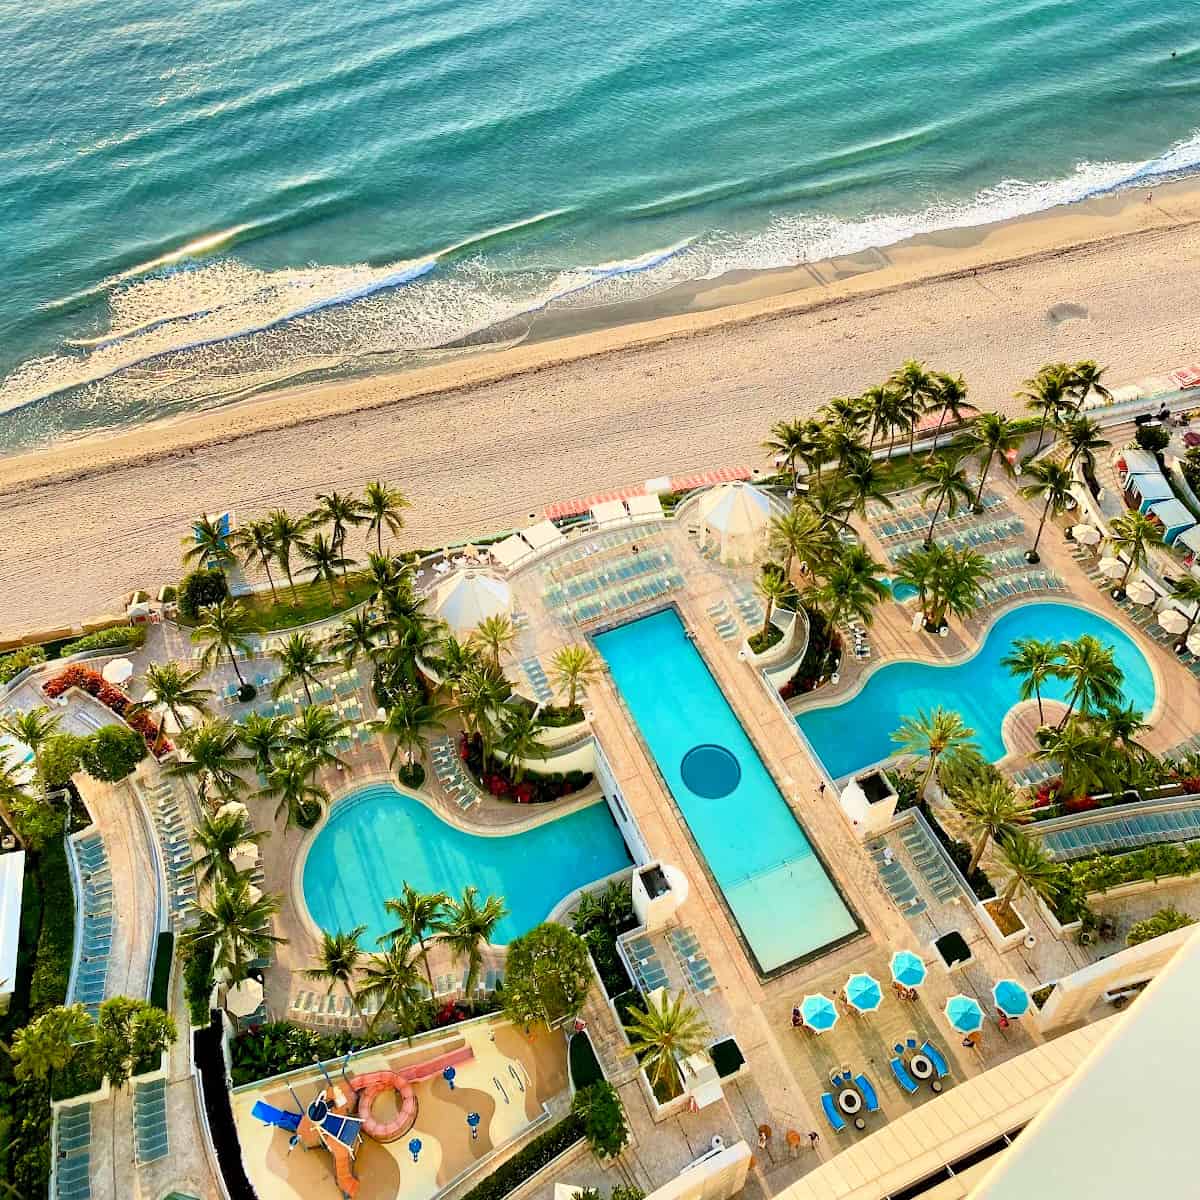 Arial view of three pools on the beach.